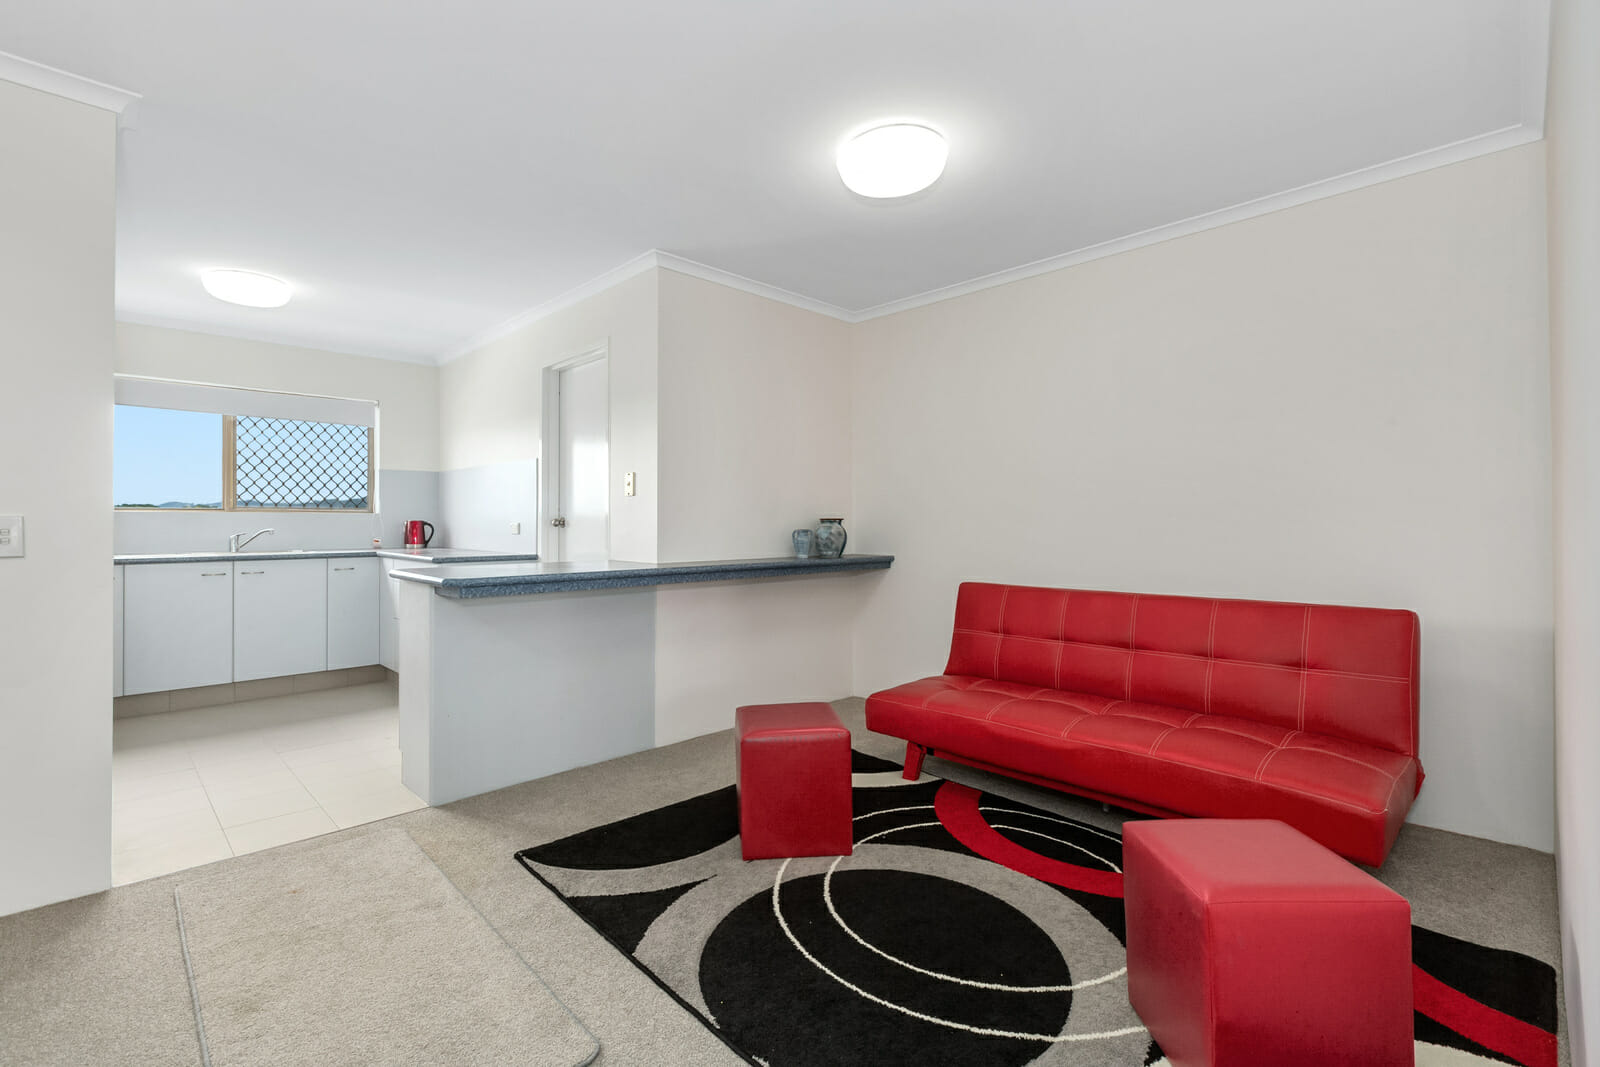 Sitting room with a red couch, adjoining kitchen area